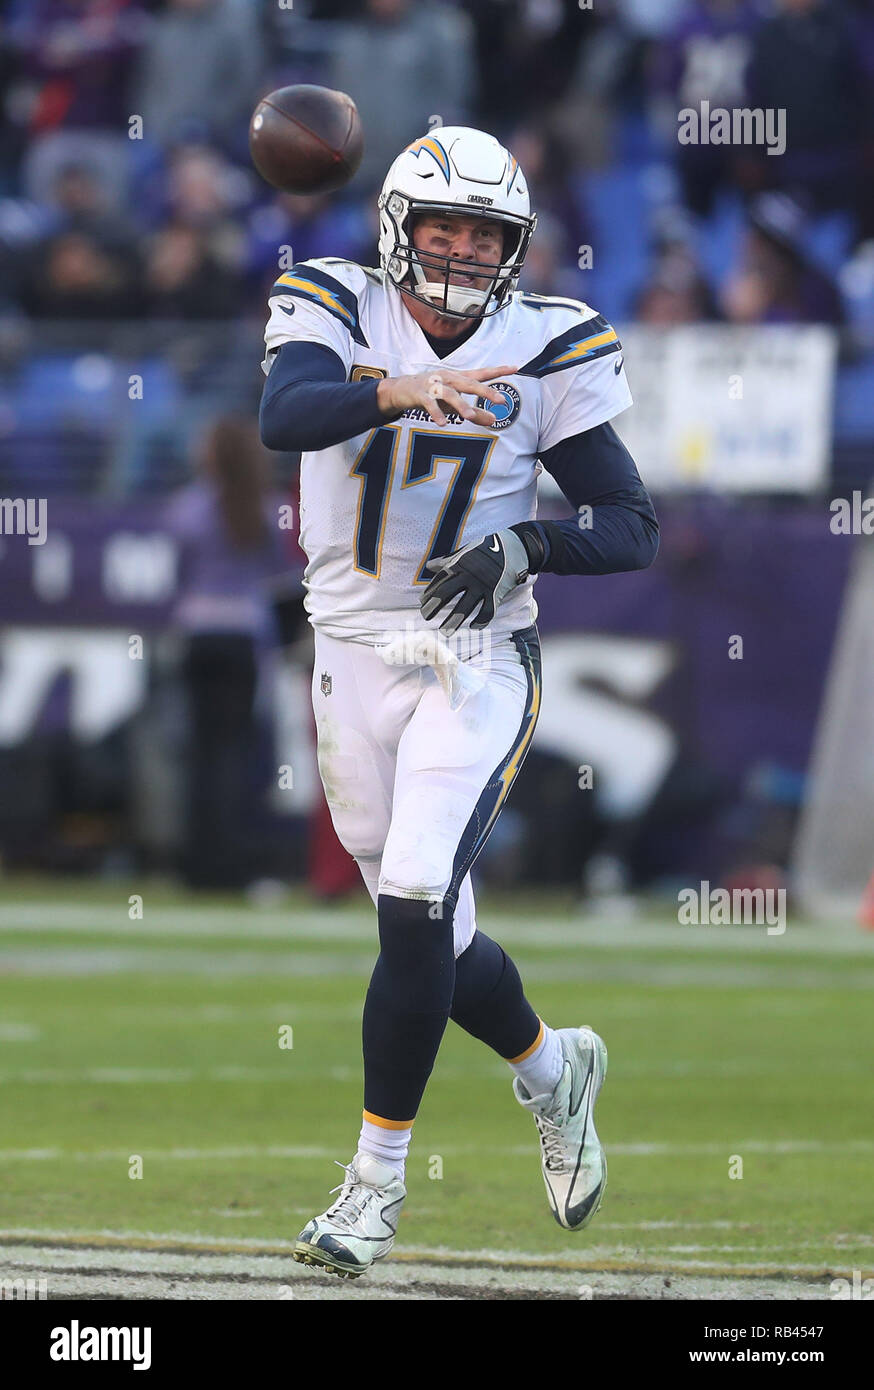 Los Angeles Chargers QB Philip Rivers (17) in action against the Baltimore Ravens during the AFC wildcard playoff game at M&T Bank Stadium in Baltimore, MD on January 6, 2019. Photo/ Mike Buscher/Cal Sport Media Stock Photo